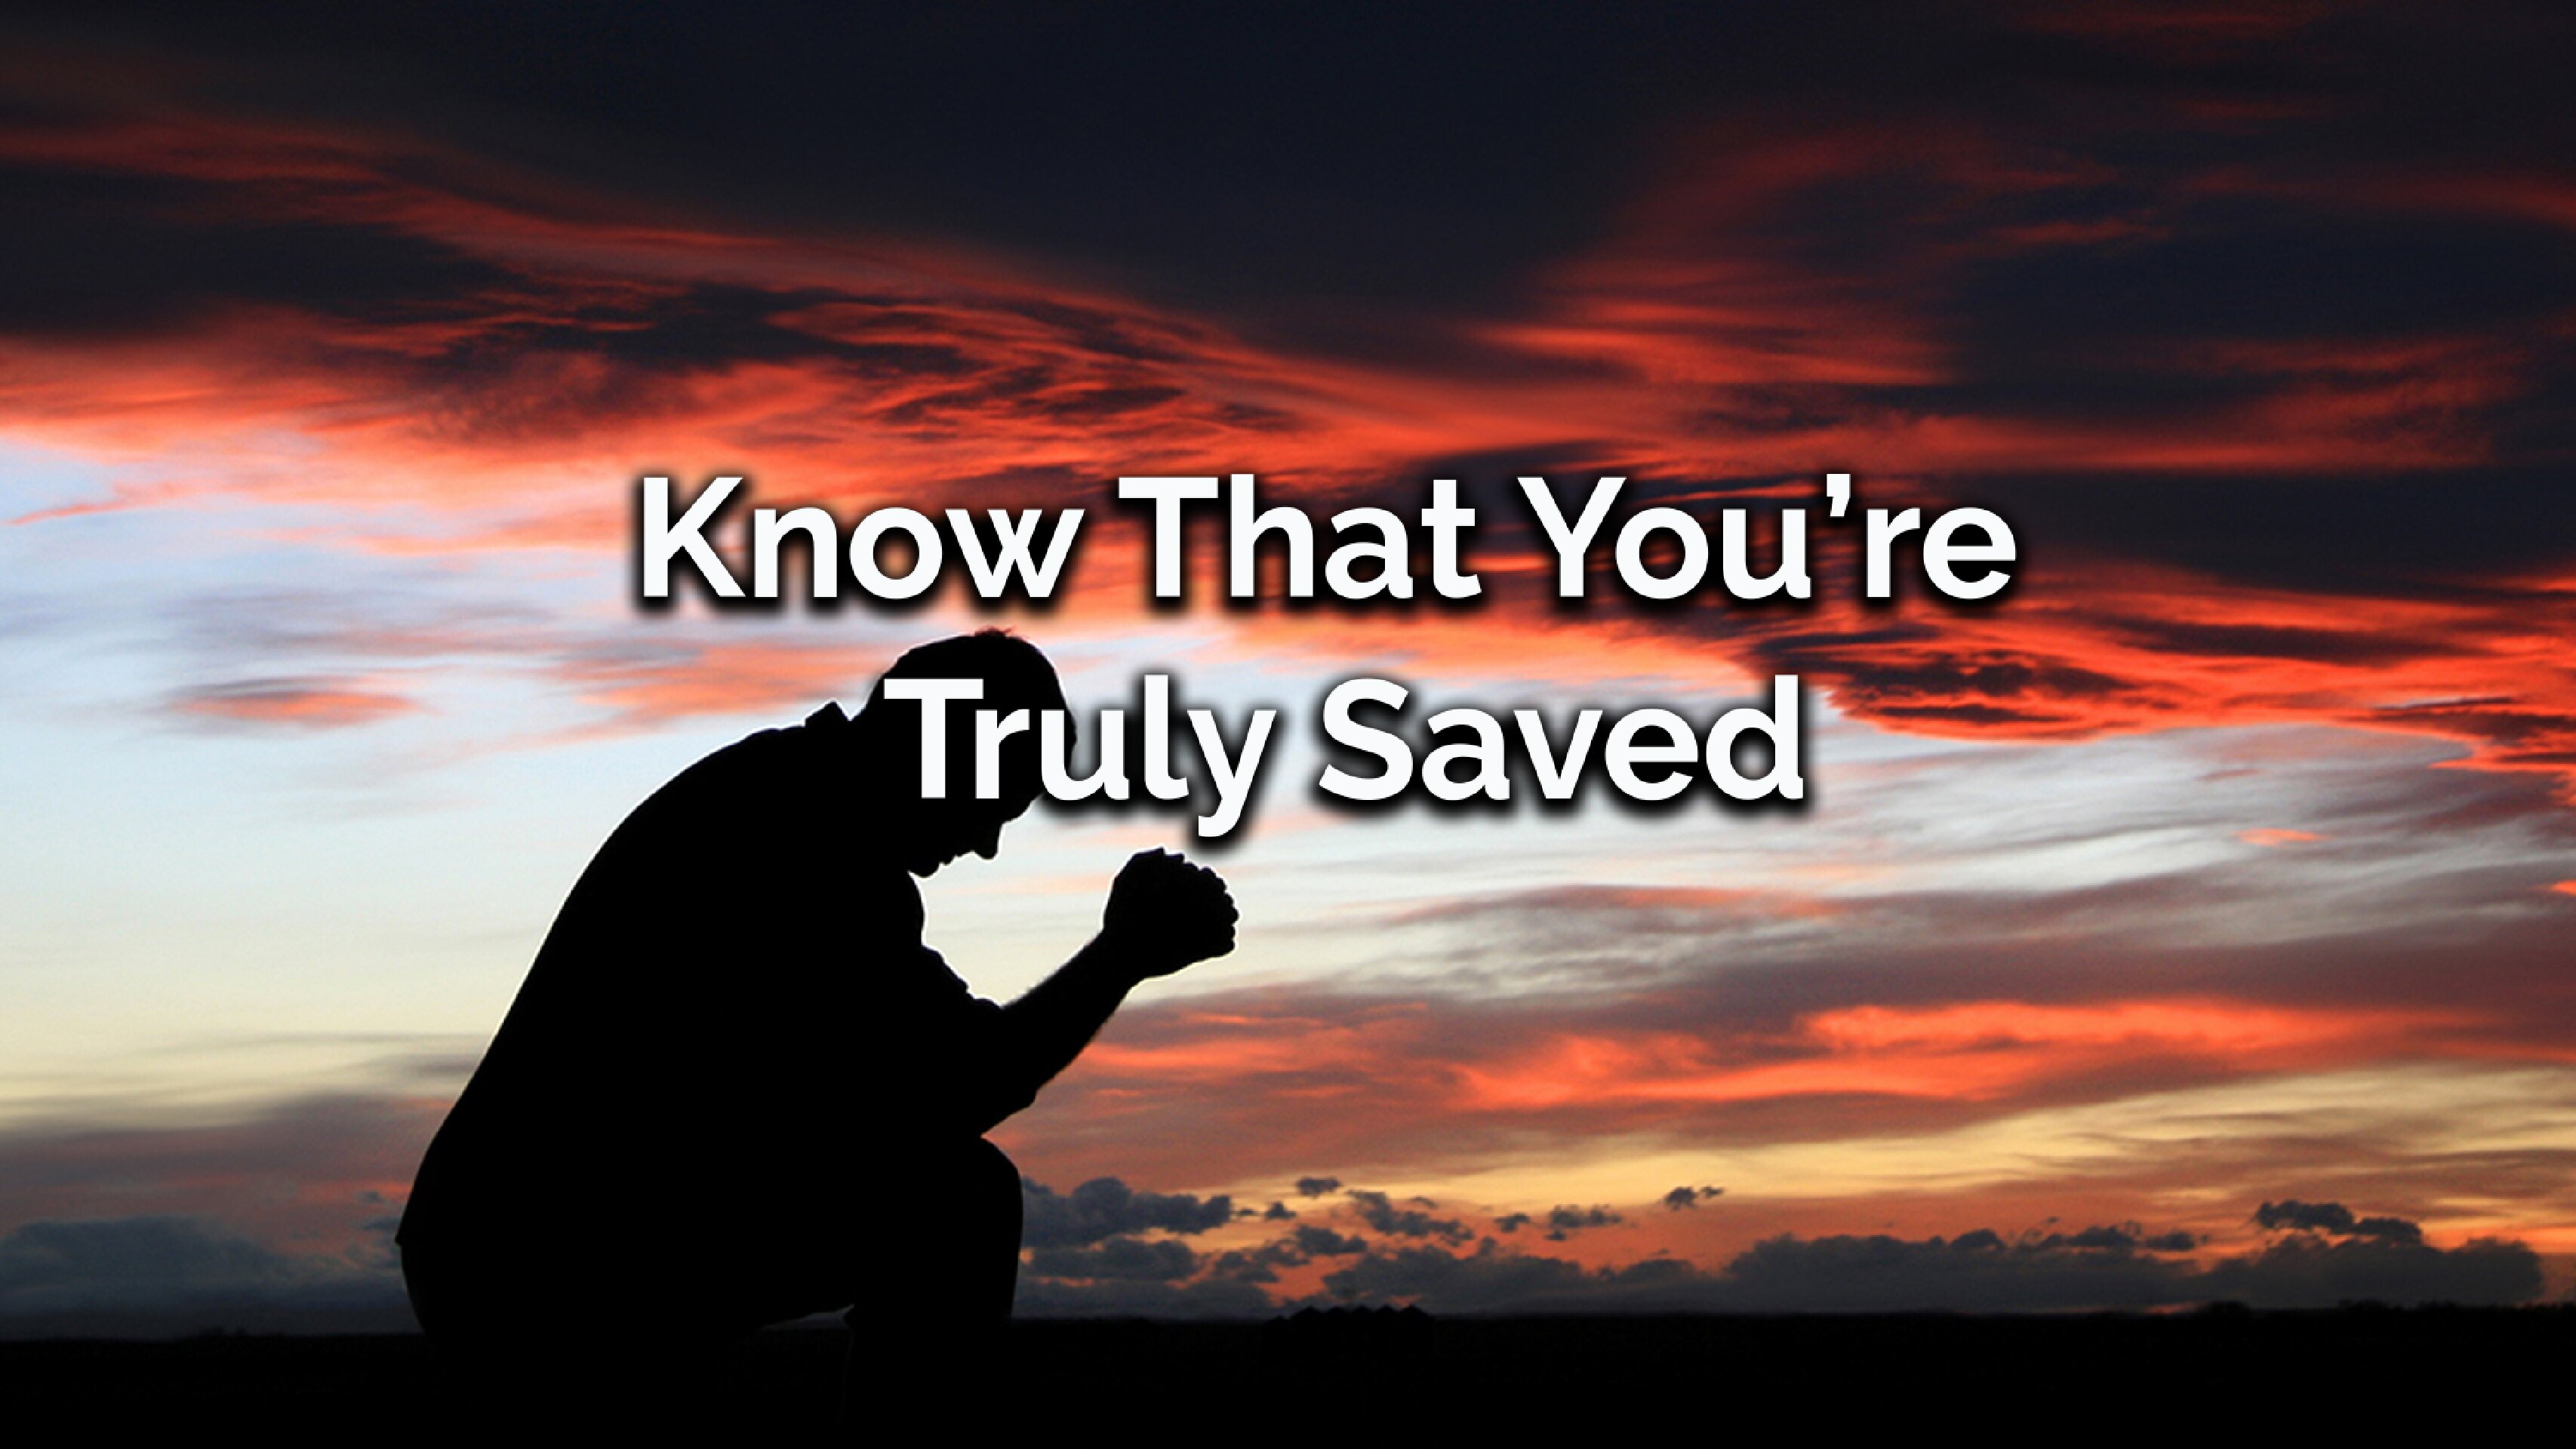 Know That You’re Truly Saved